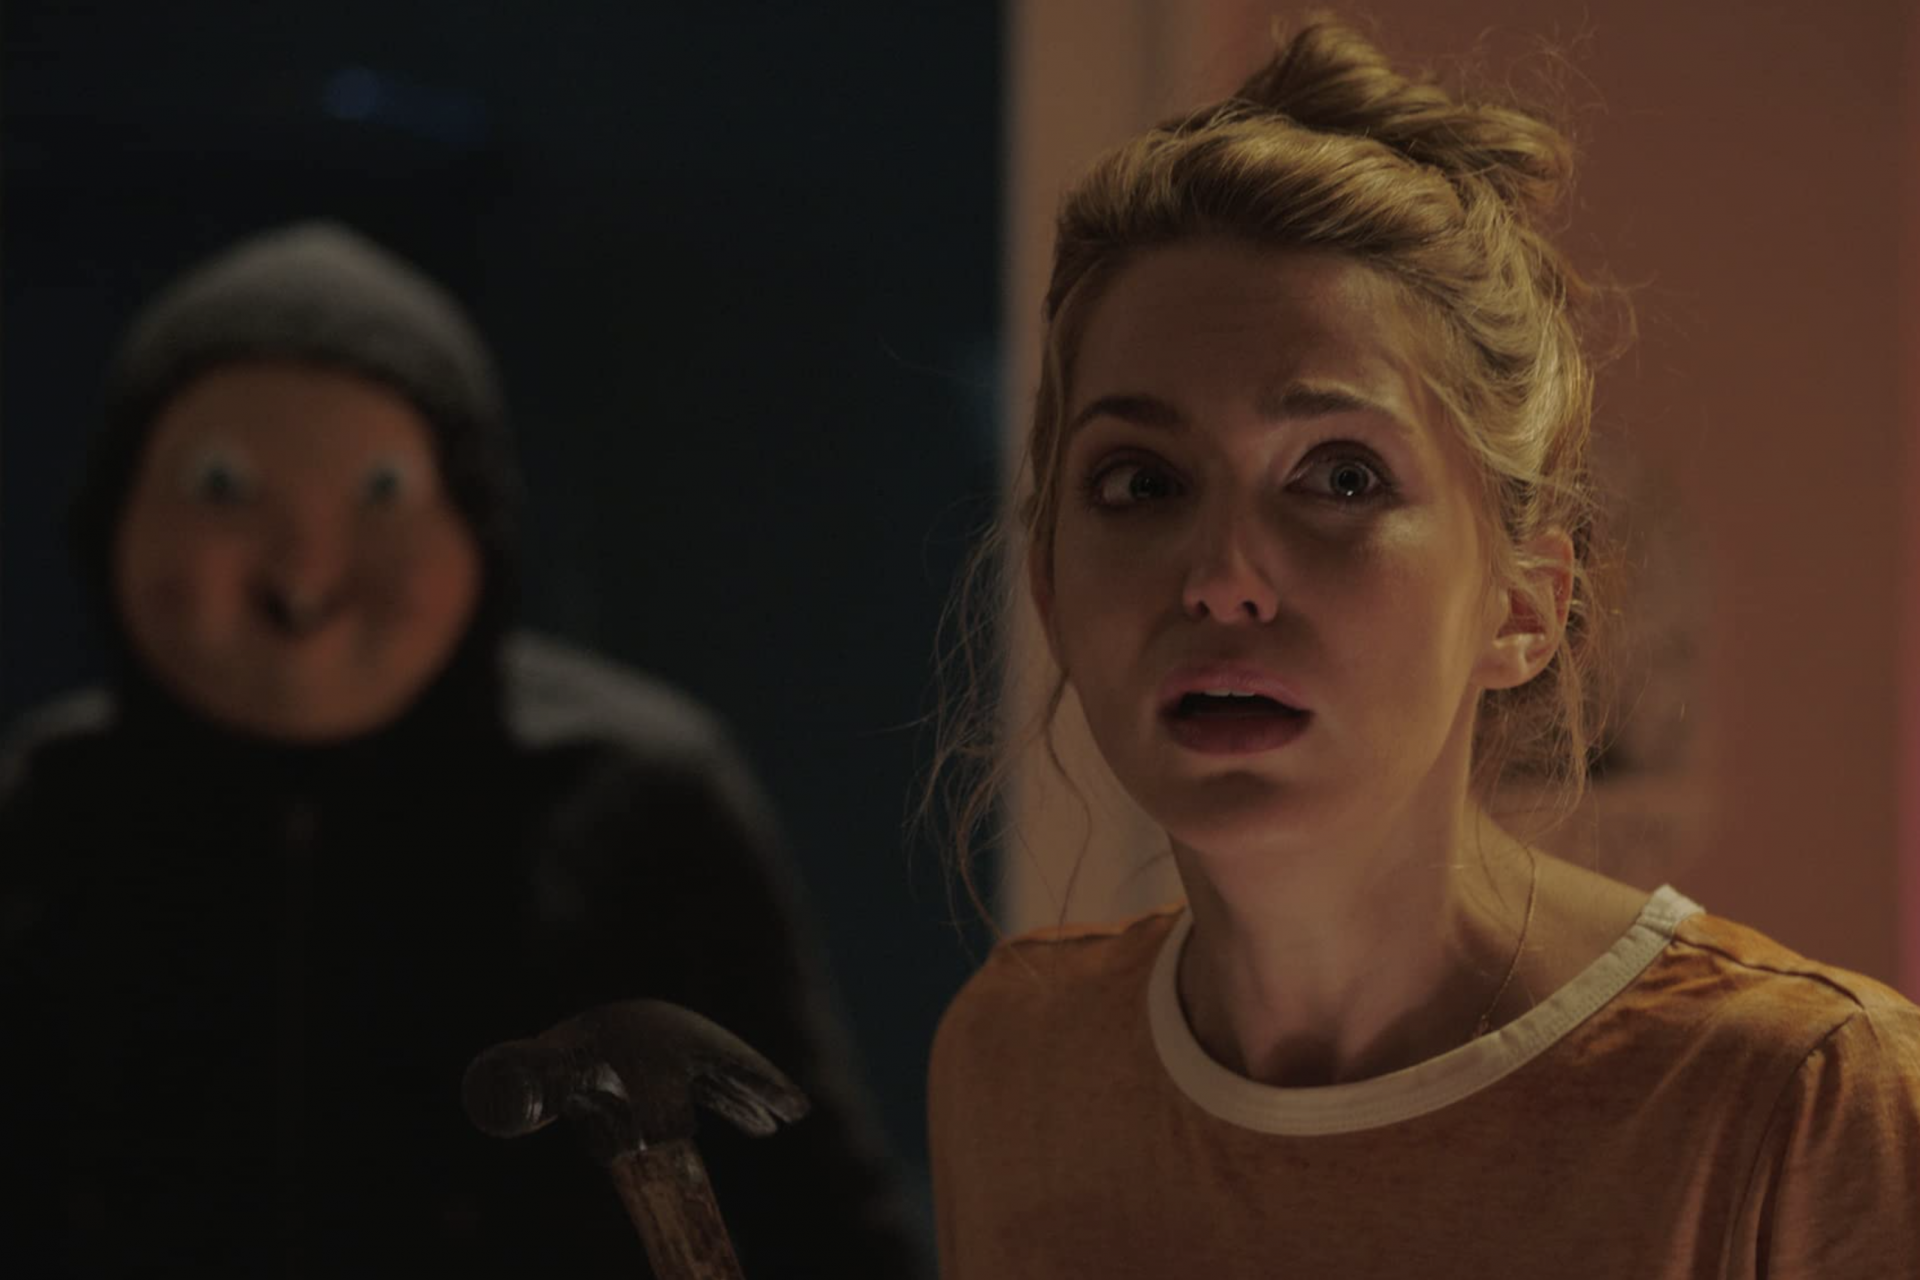 <p>Happy Death Day - Blumhouse combined a horror element with time loops and we got Theresa who relives a birthday without end. She must discover who murdered her.</p> <p>Photo: Universal Pictures</p>